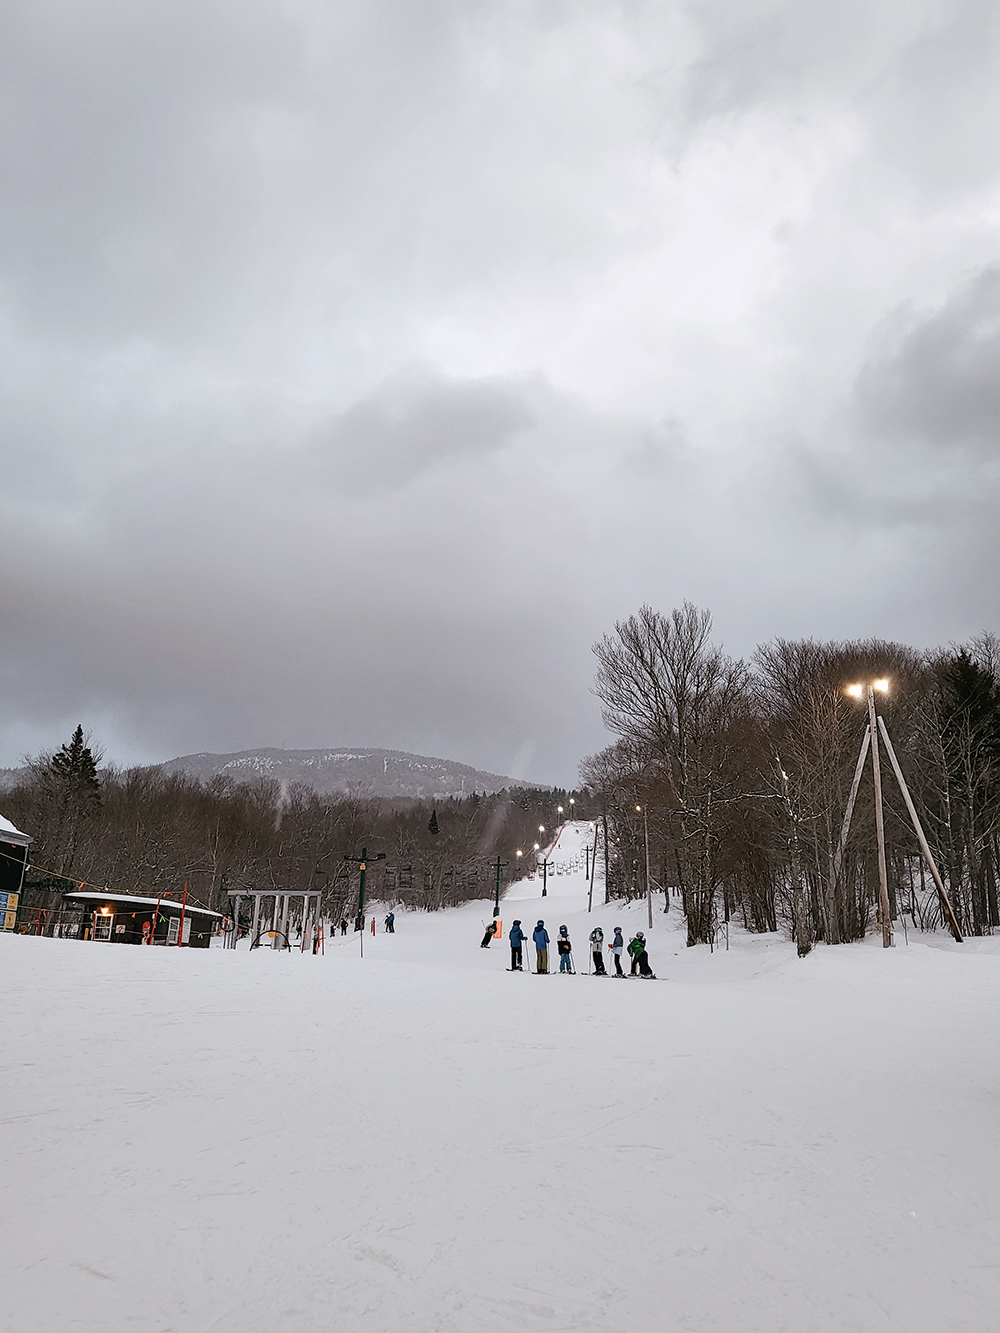 Winter Travel Guide- the Best Things to Do in Bolton Valley VT with your Family by Tabitha Blue - Night skiing at Bolton Valley Resort!